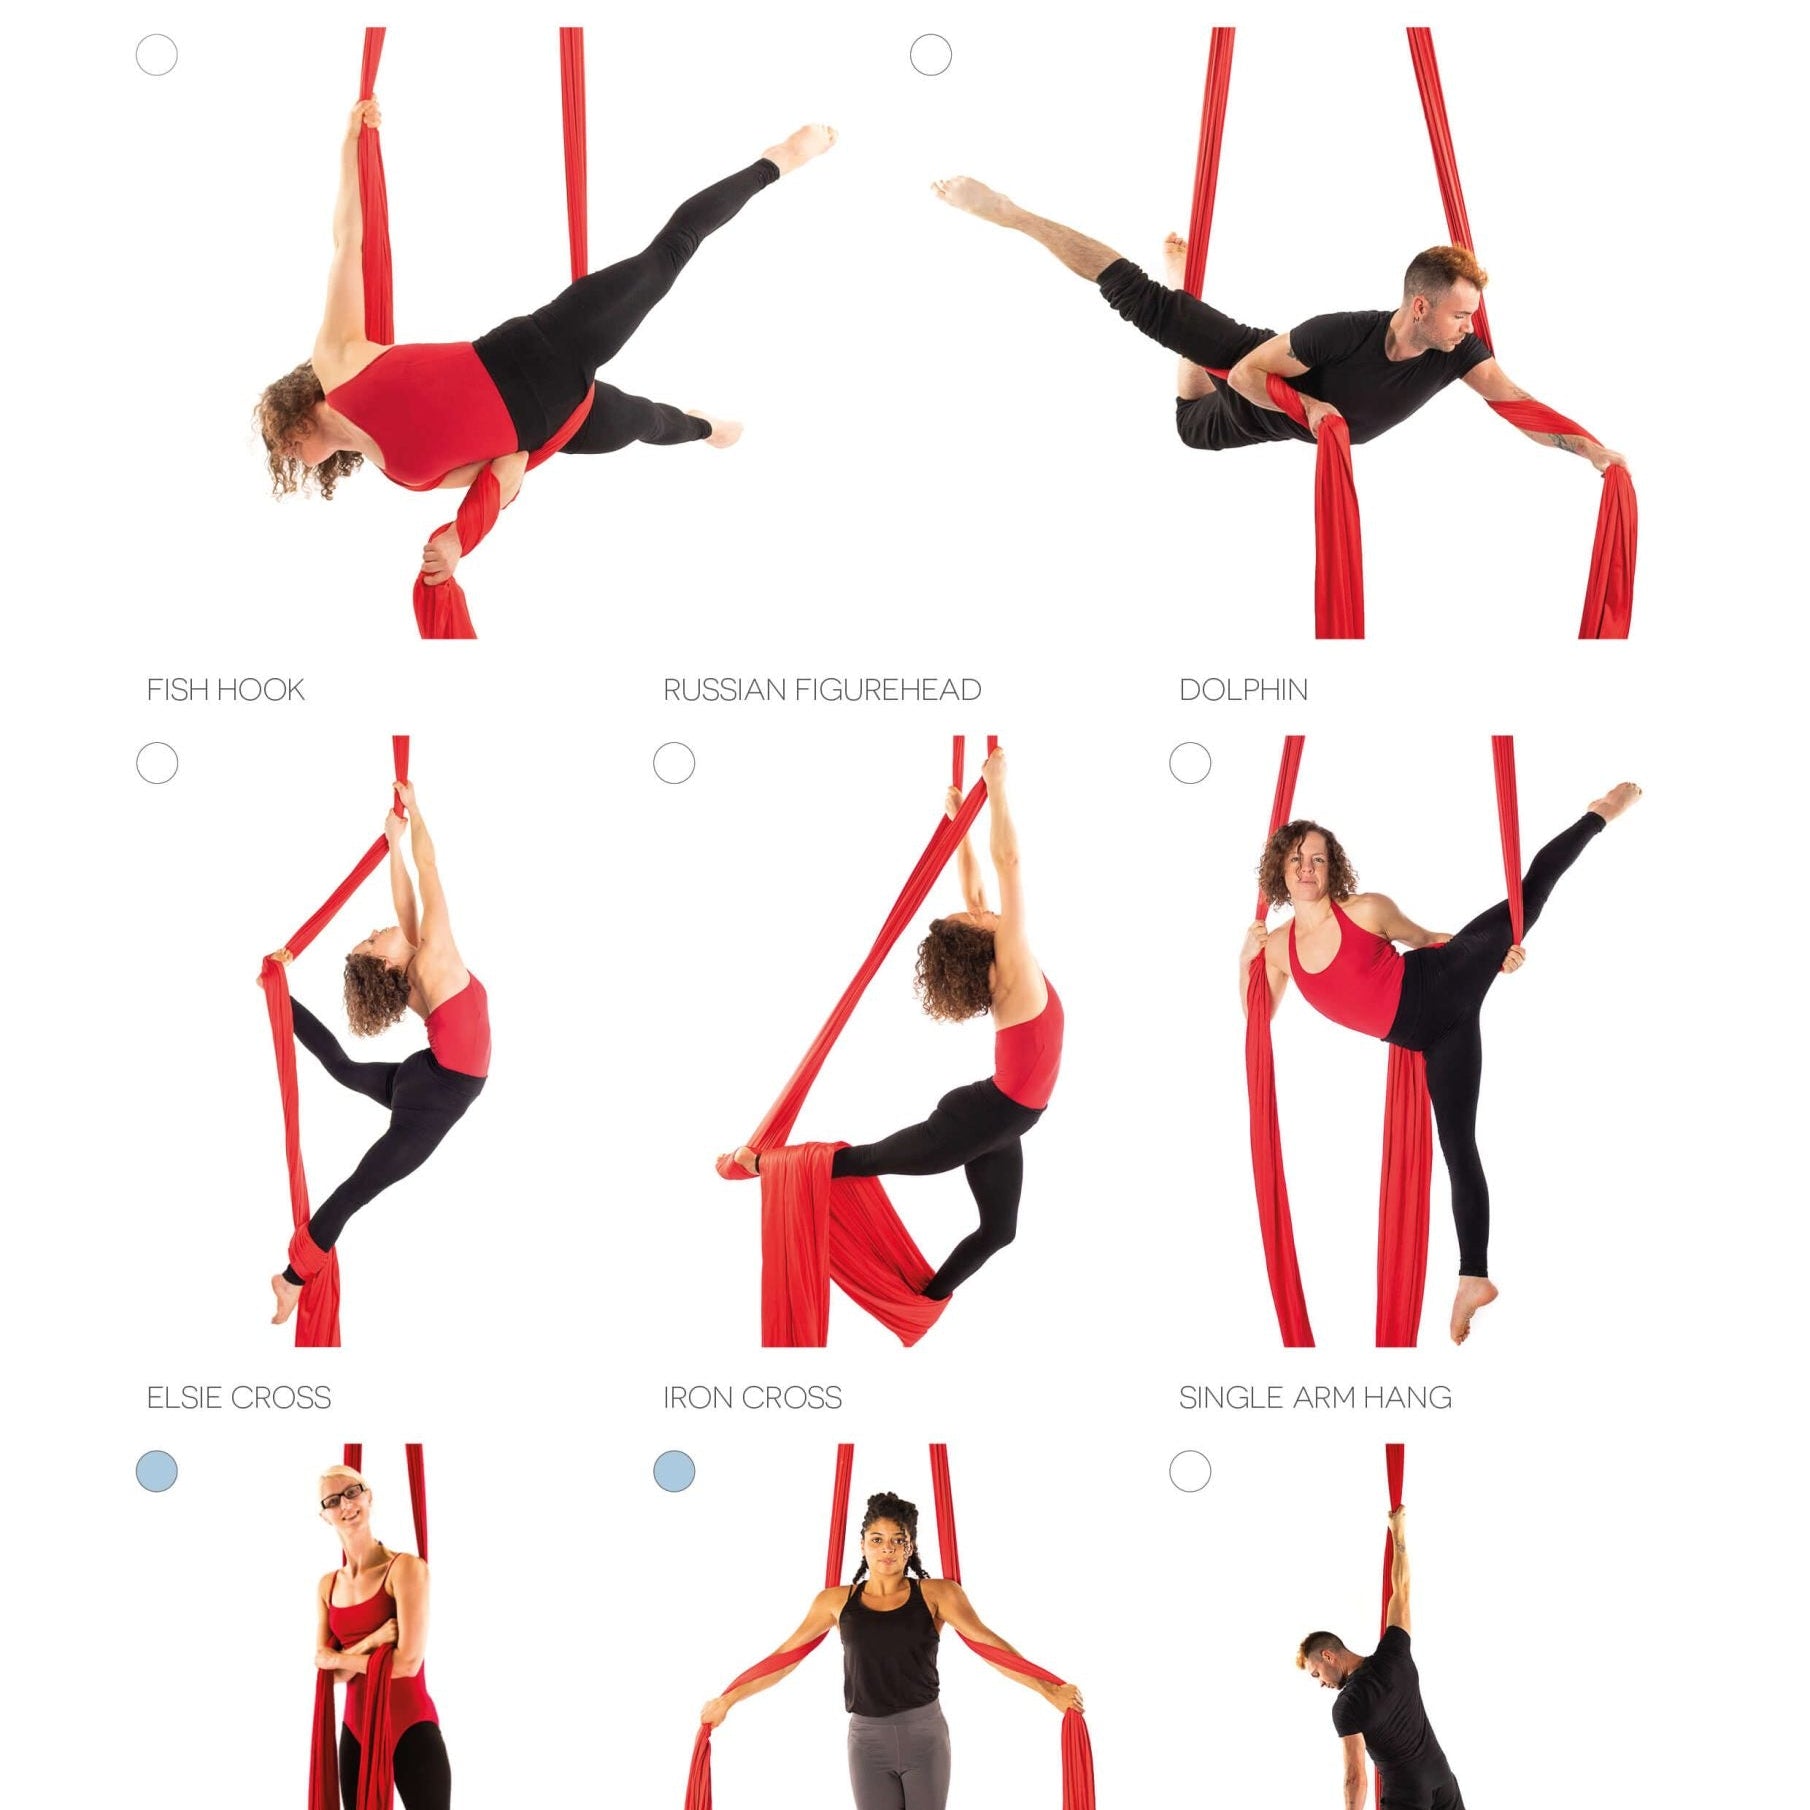 Silks Bible page using photos to demonstrate a variety of moves like crocodile, fish hook, iron cross, and single arm hang